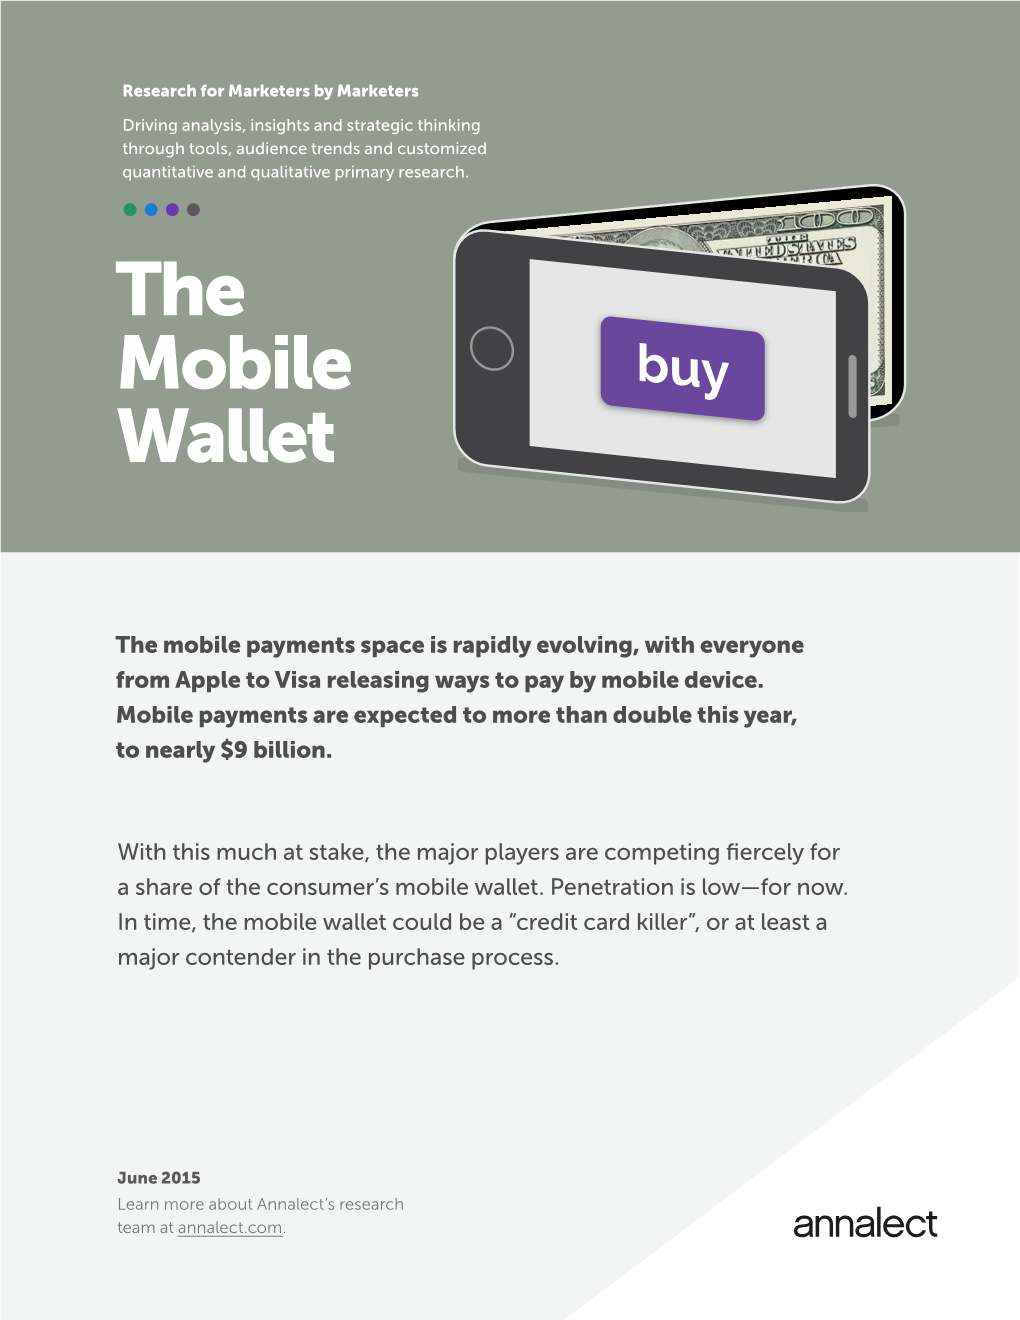 The Mobile Wallet Could Be a “Credit Card Killer”, Or at Least a Major Contender in the Purchase Process